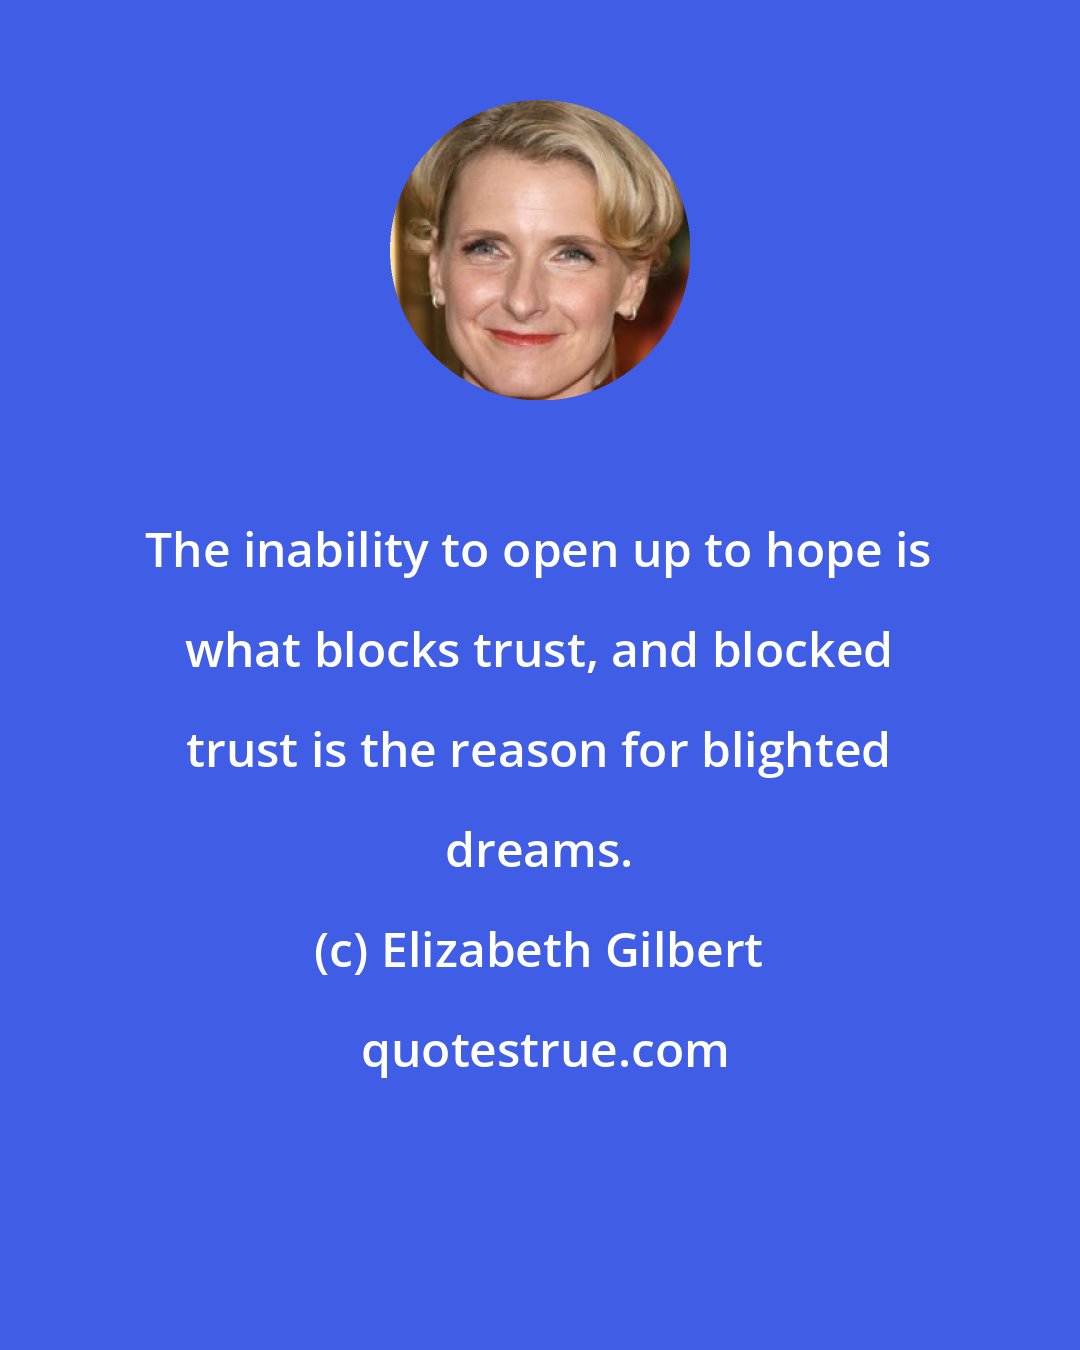 Elizabeth Gilbert: The inability to open up to hope is what blocks trust, and blocked trust is the reason for blighted dreams.